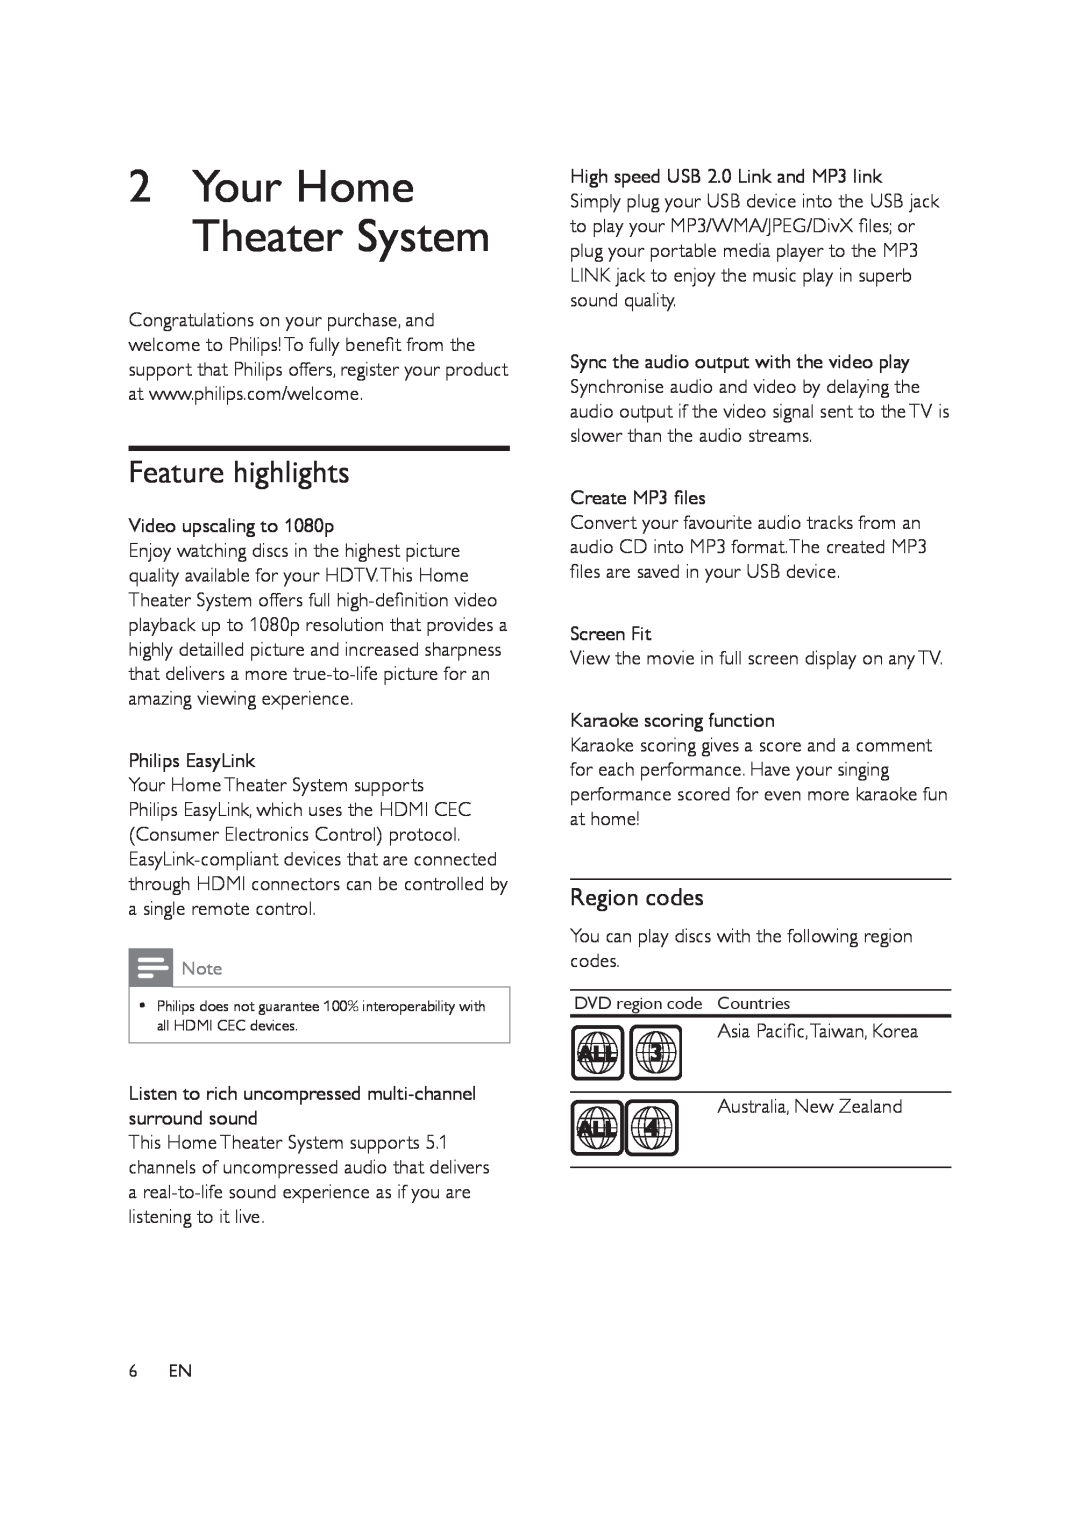 Philips HTS3578W user manual 2Your Home Theater System, Feature highlights, Region codes 